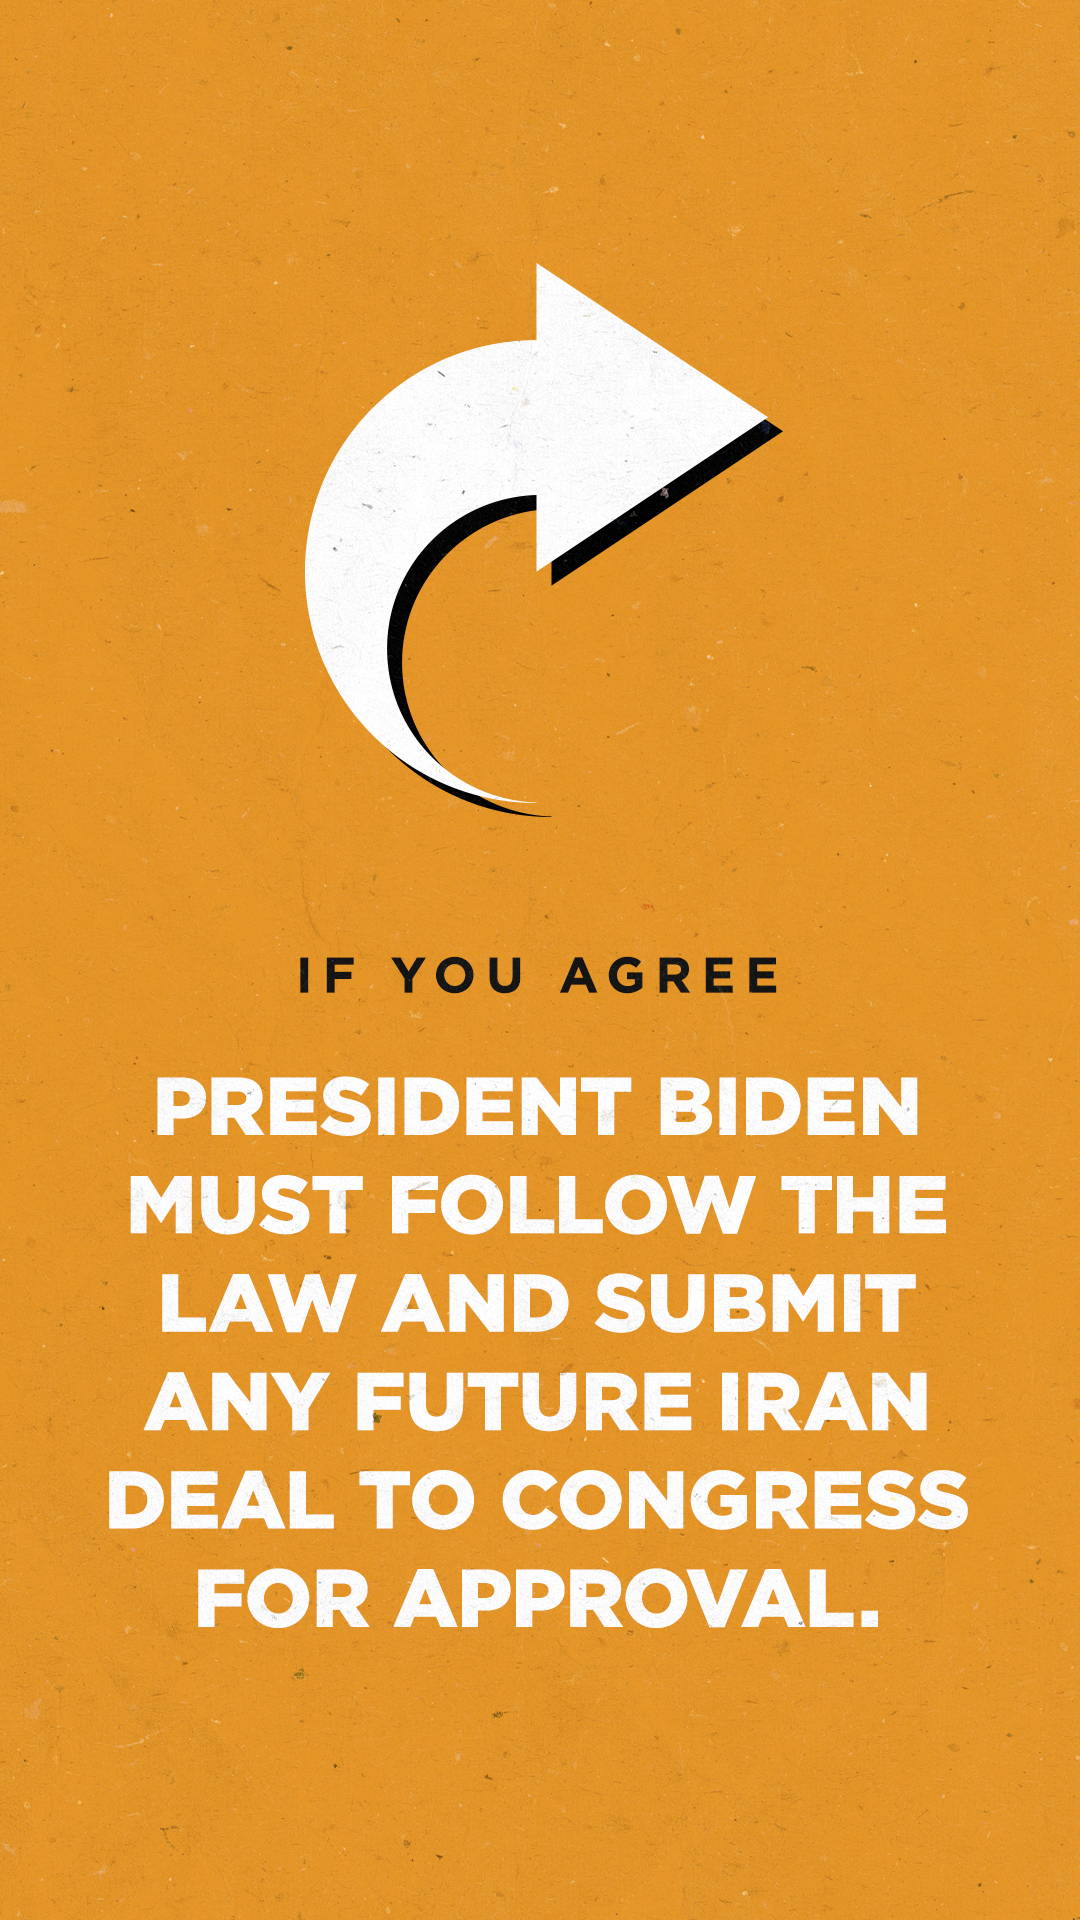 Share if you agree President Biden must follow the law and submit any future Iran Deal to Congress for approval.